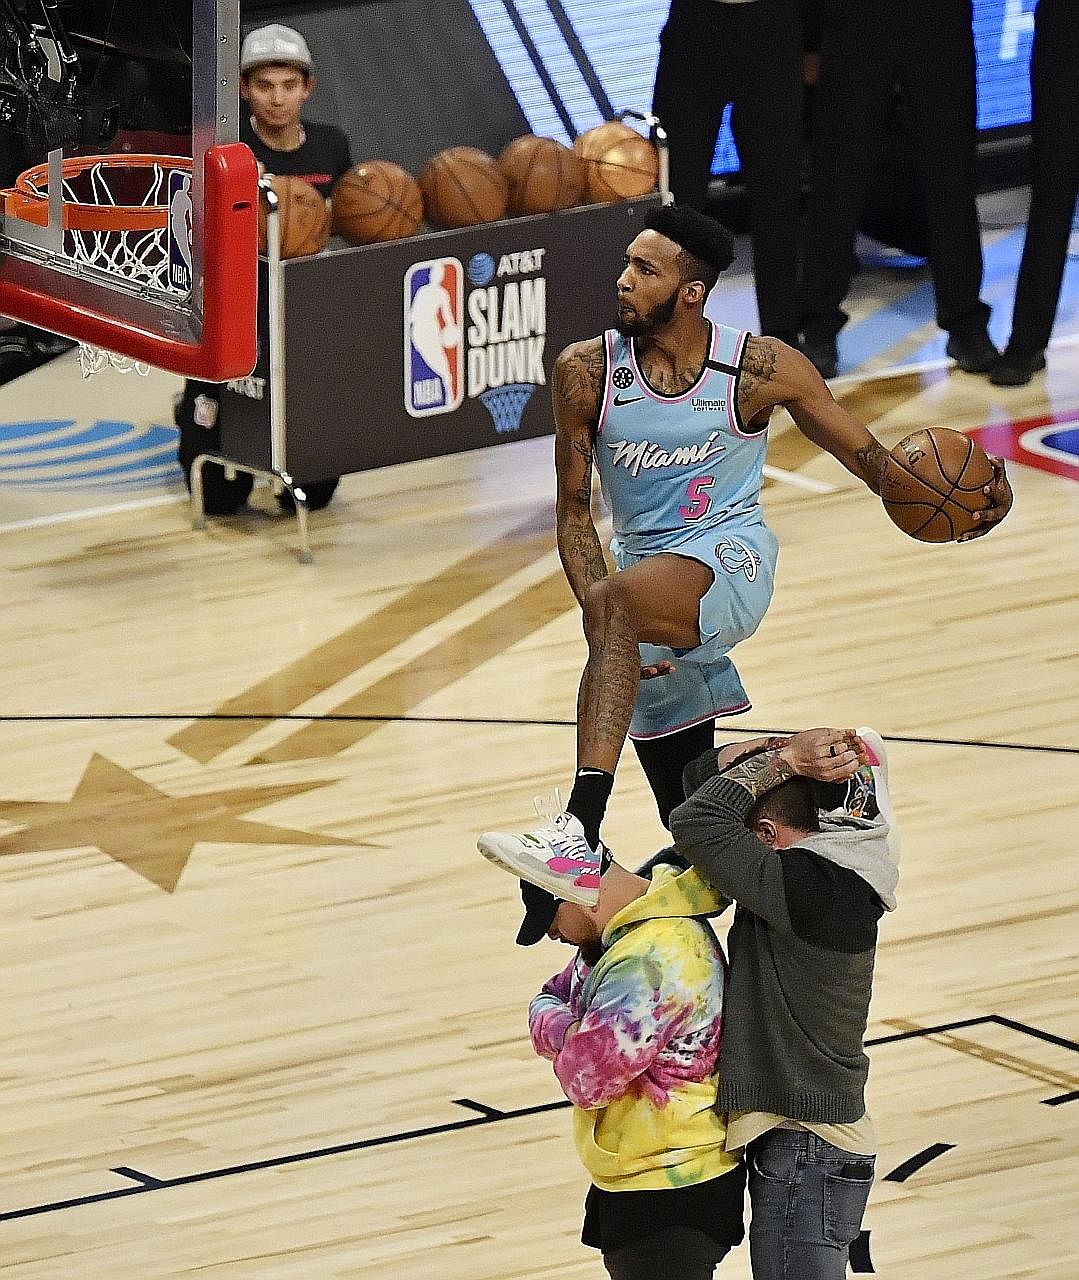 Miami's Derrick Jones Jr leaping over two "props" in the slam dunk contest during the All-Star Saturday Night at the United Centre. He beat Orlando's Aaron Gordon.